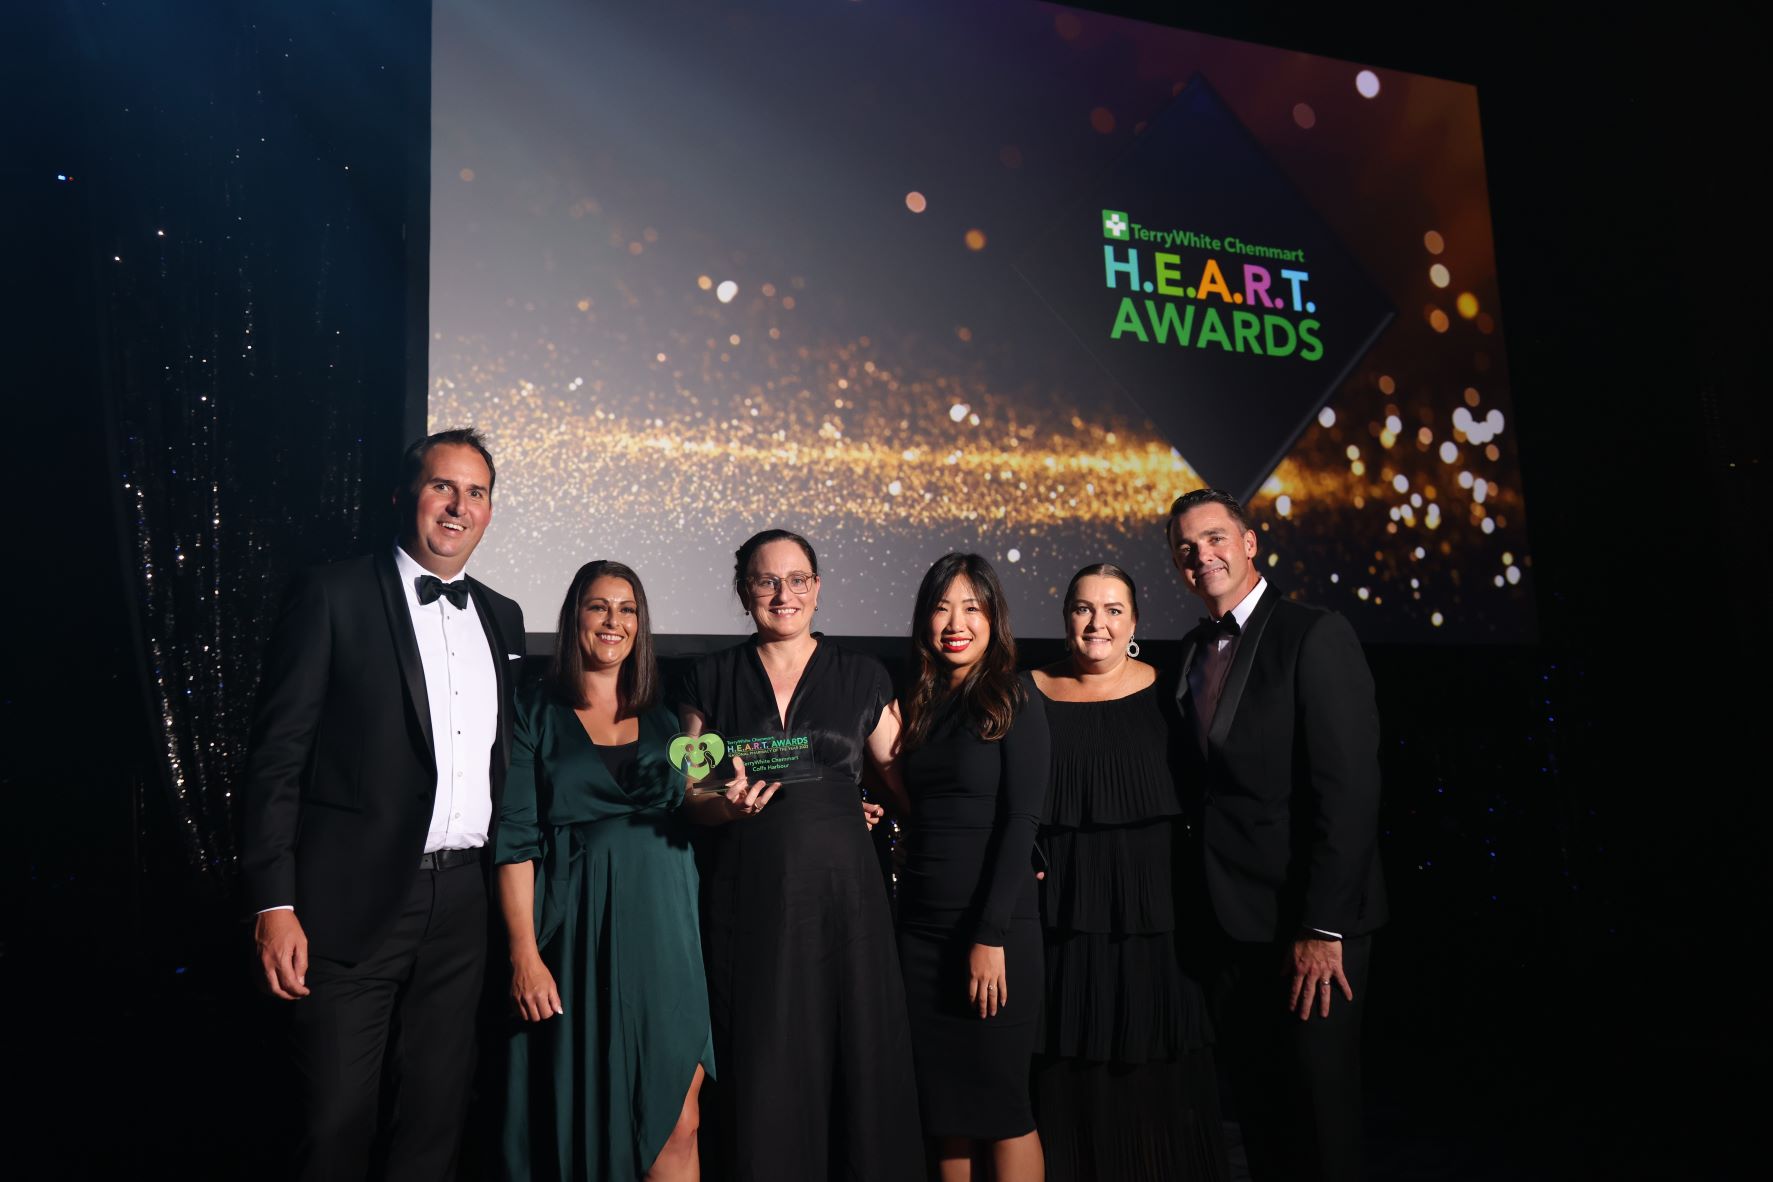 Pharmacy of the year 2022 national winner TWC Coffs Harbour, NSW team with Nick Munroe - TerryWhite Chemmart Executive General Manager and Michael Beaumont - TerryWhite Chemmart Group Operations Manager